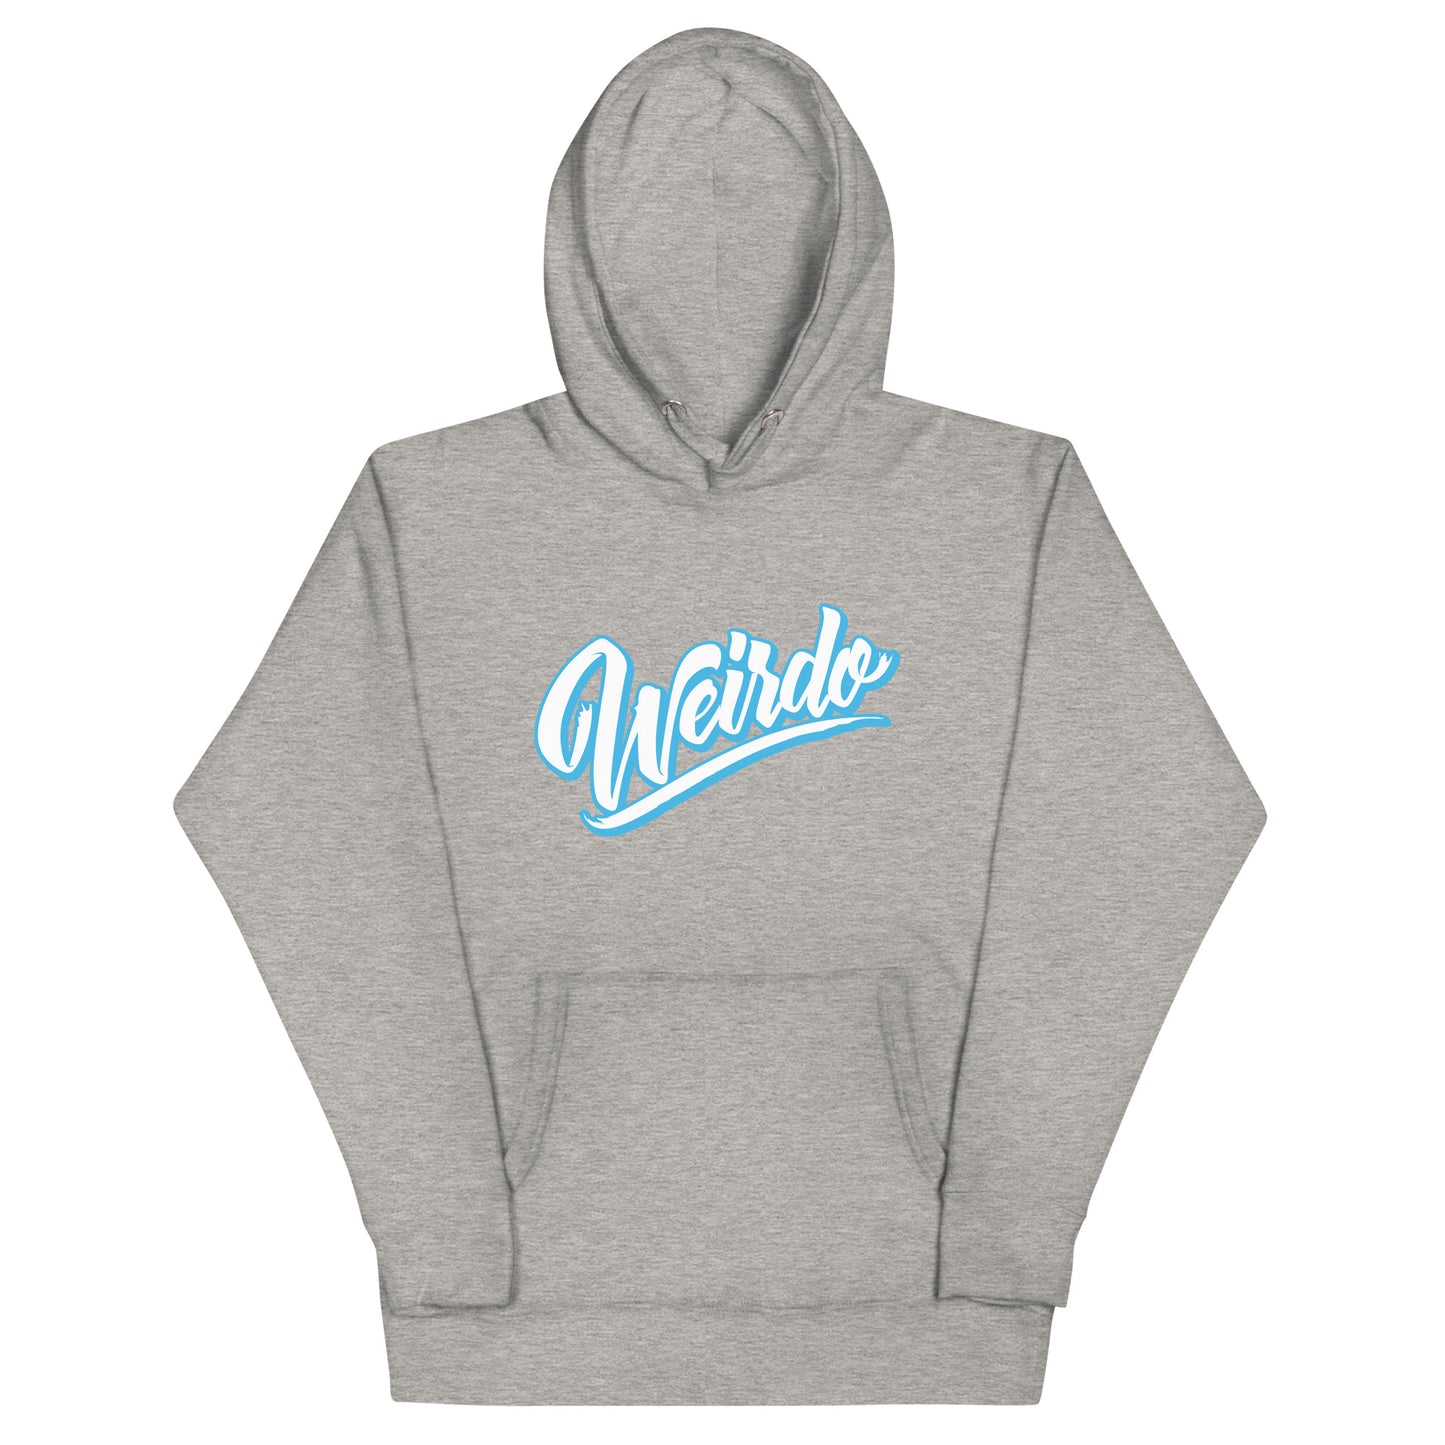 hoodie Weirdo gray by B.Different Clothing independent streetwear brand inspired by street art graffiti